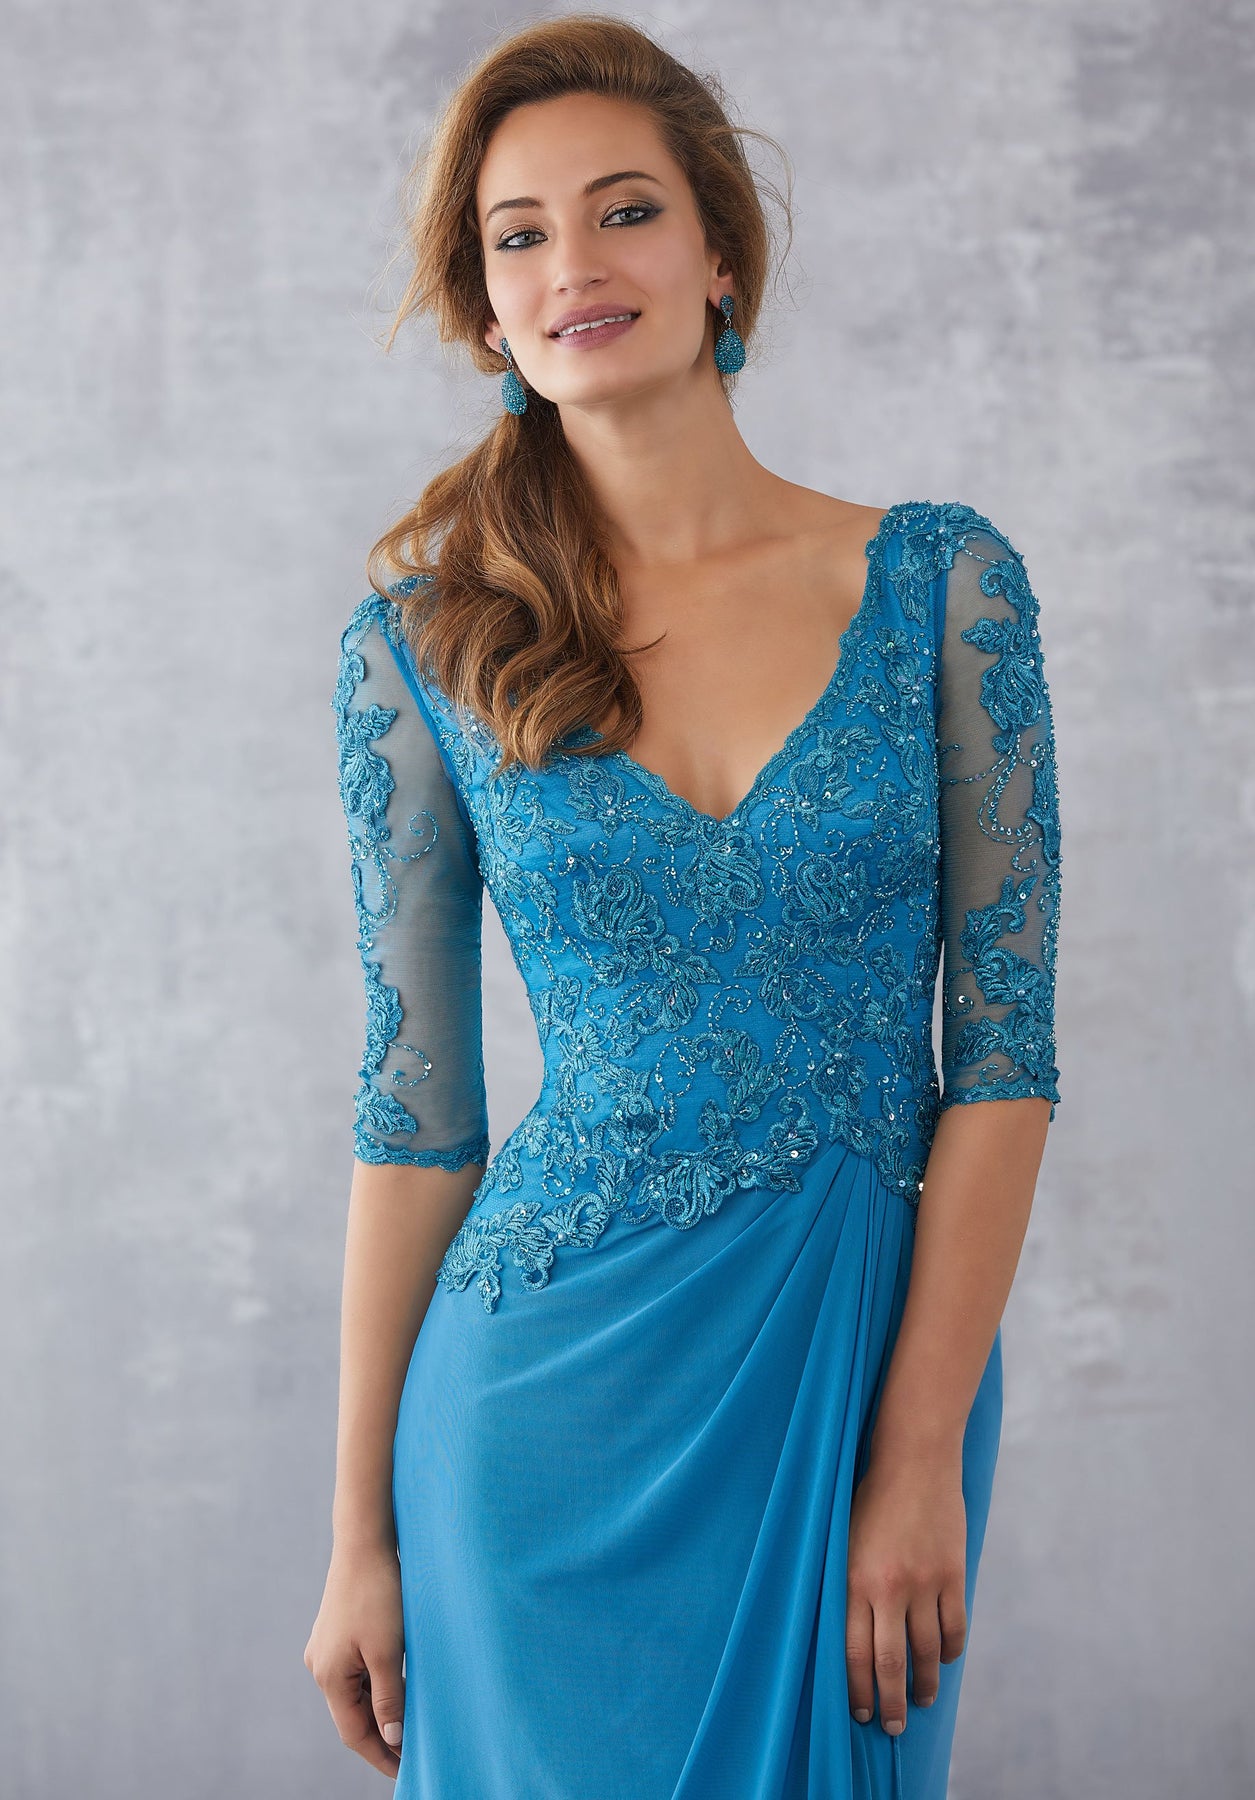 MGNY By Mori Lee - 71728 Embroidered Plunging V-neck Sheath Dress In Blue and Green